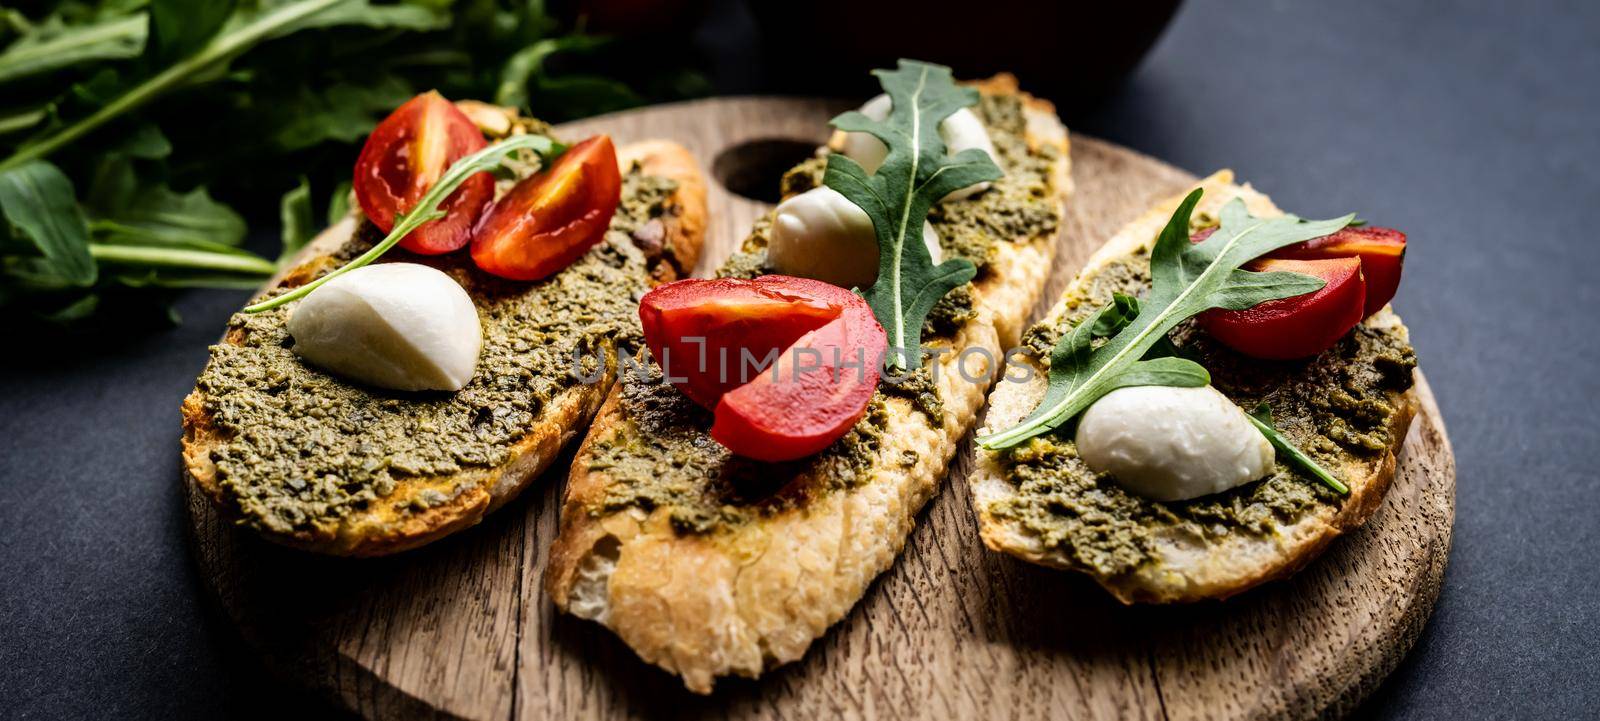 Bruschettas with pesto, tomatoes, mozzarella cheese and basil on wooden board served with guacamole, arugula and salt with herb. Italian tosted bread with vegetables and traditional sauce